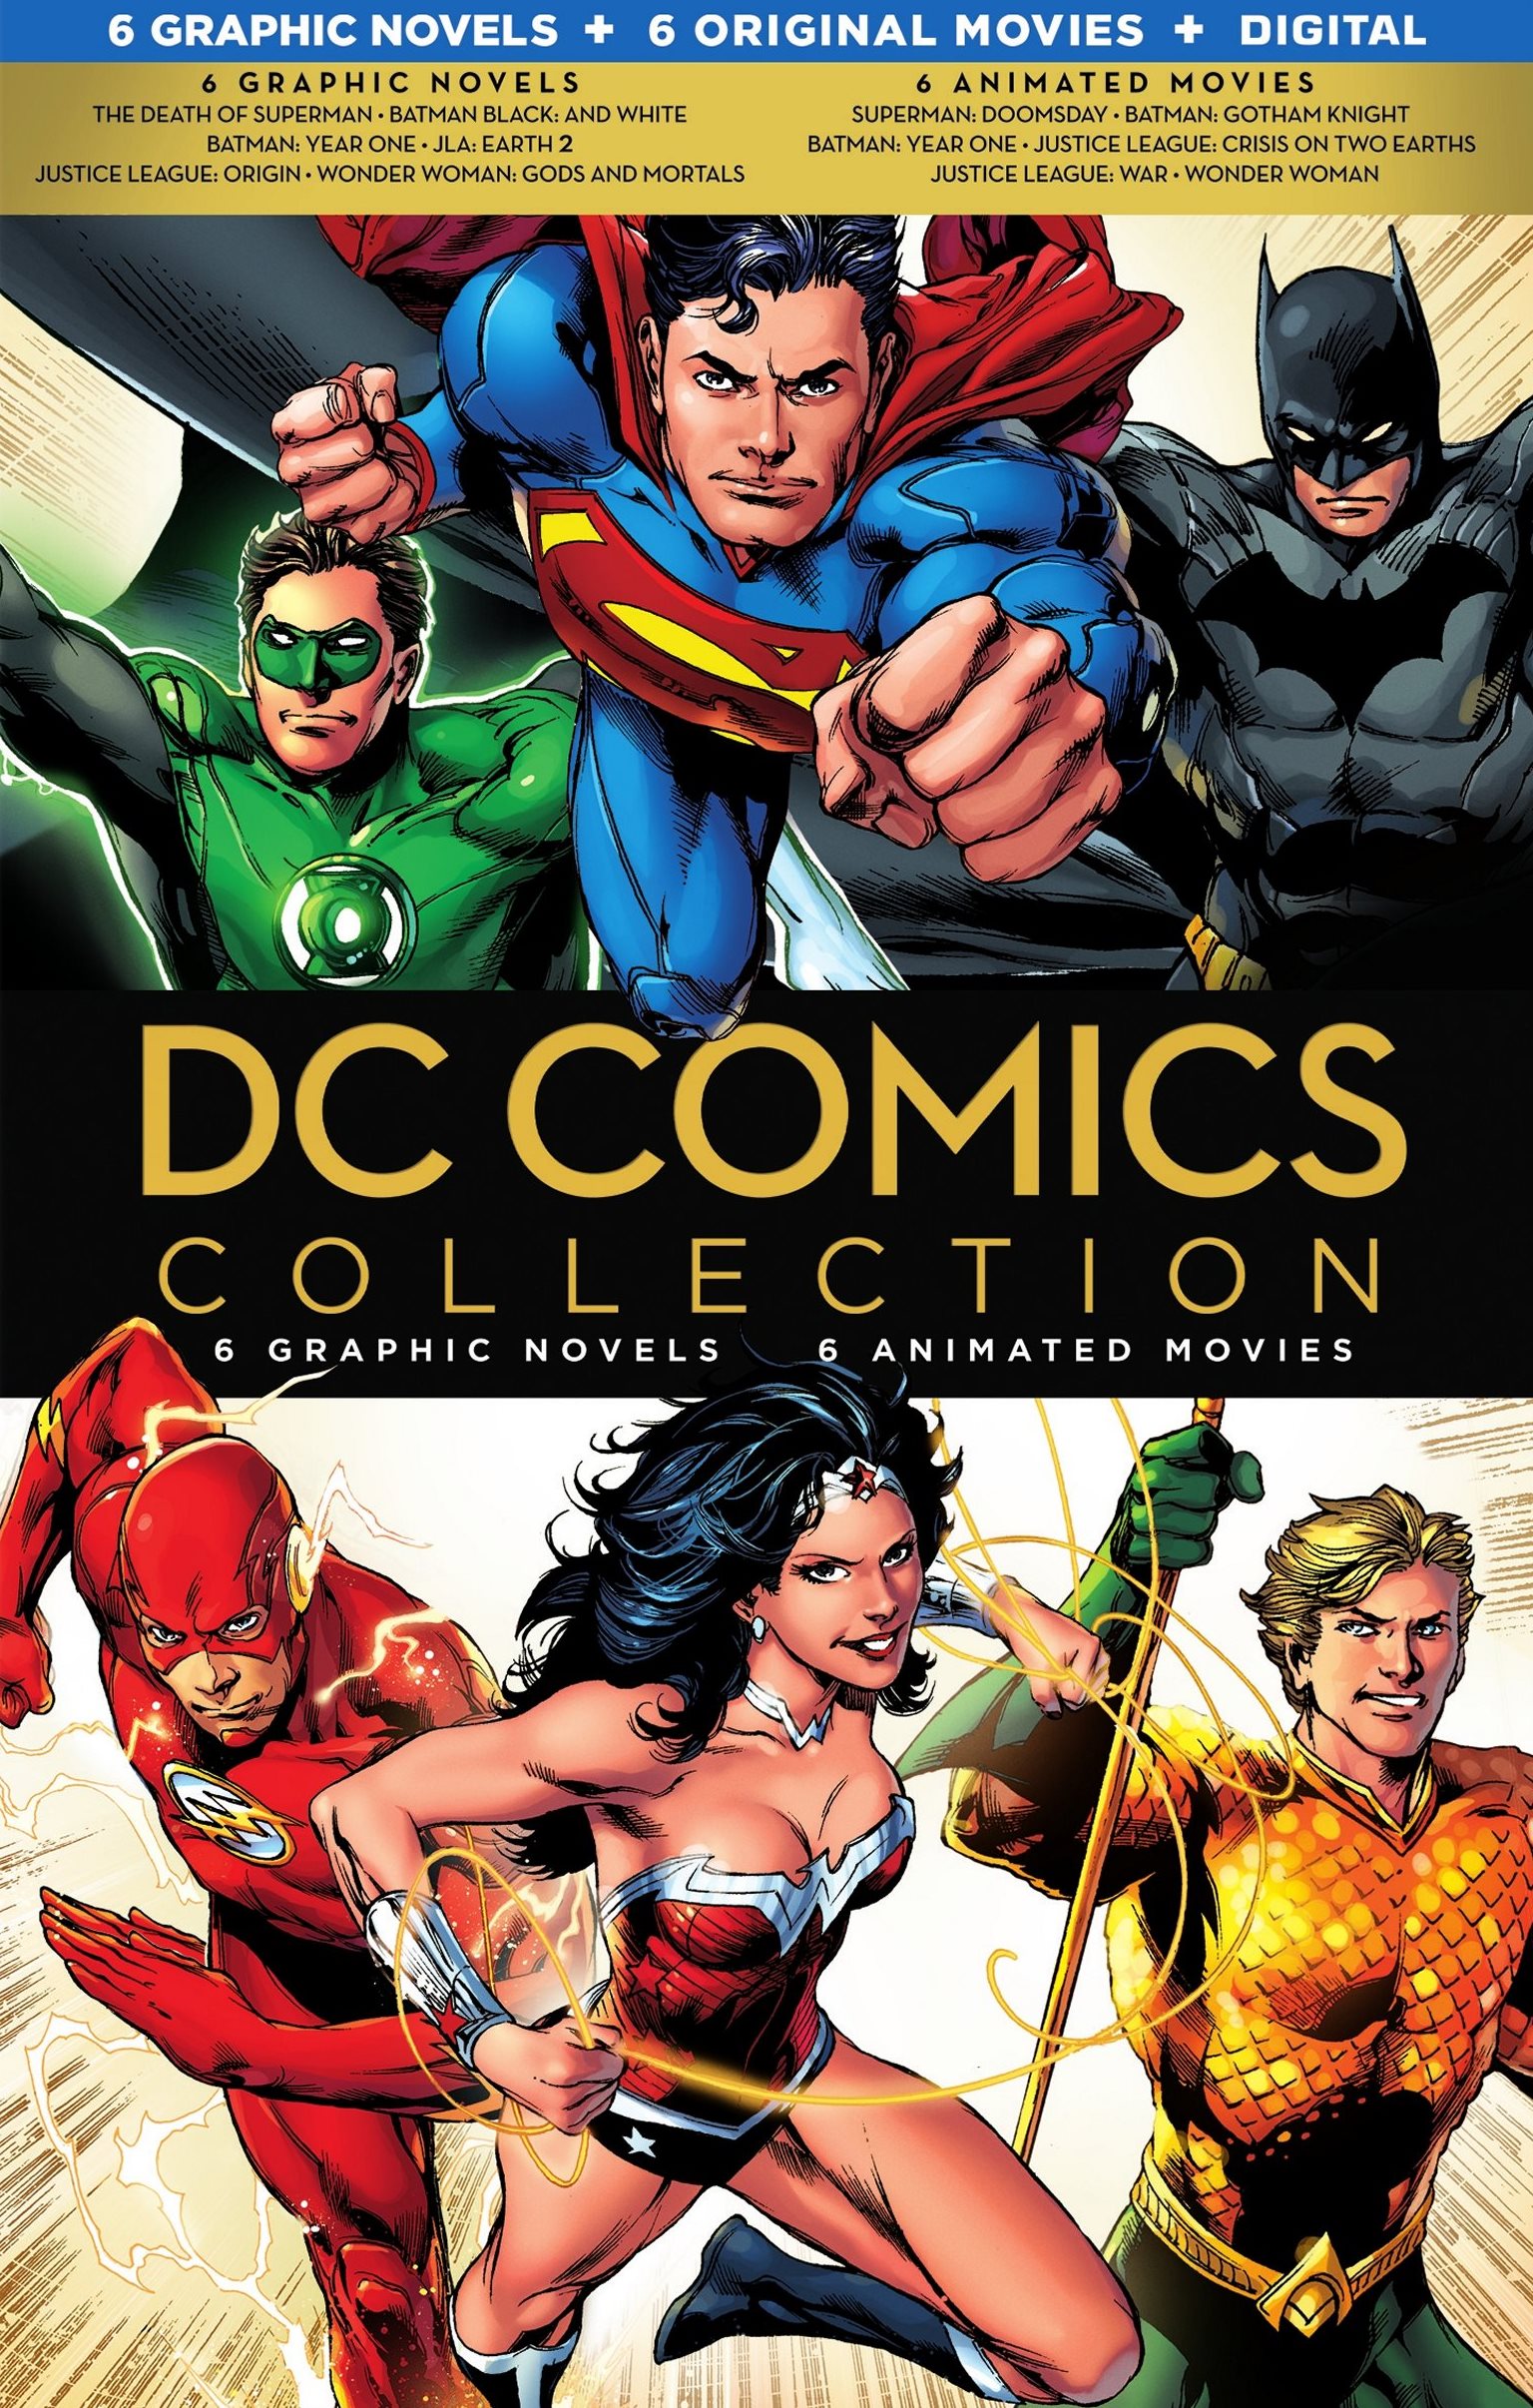 DC Comics Collection: 6 Graphic Novels 6 Animated Movies [Blu-ray] [6  Discs] - Best Buy